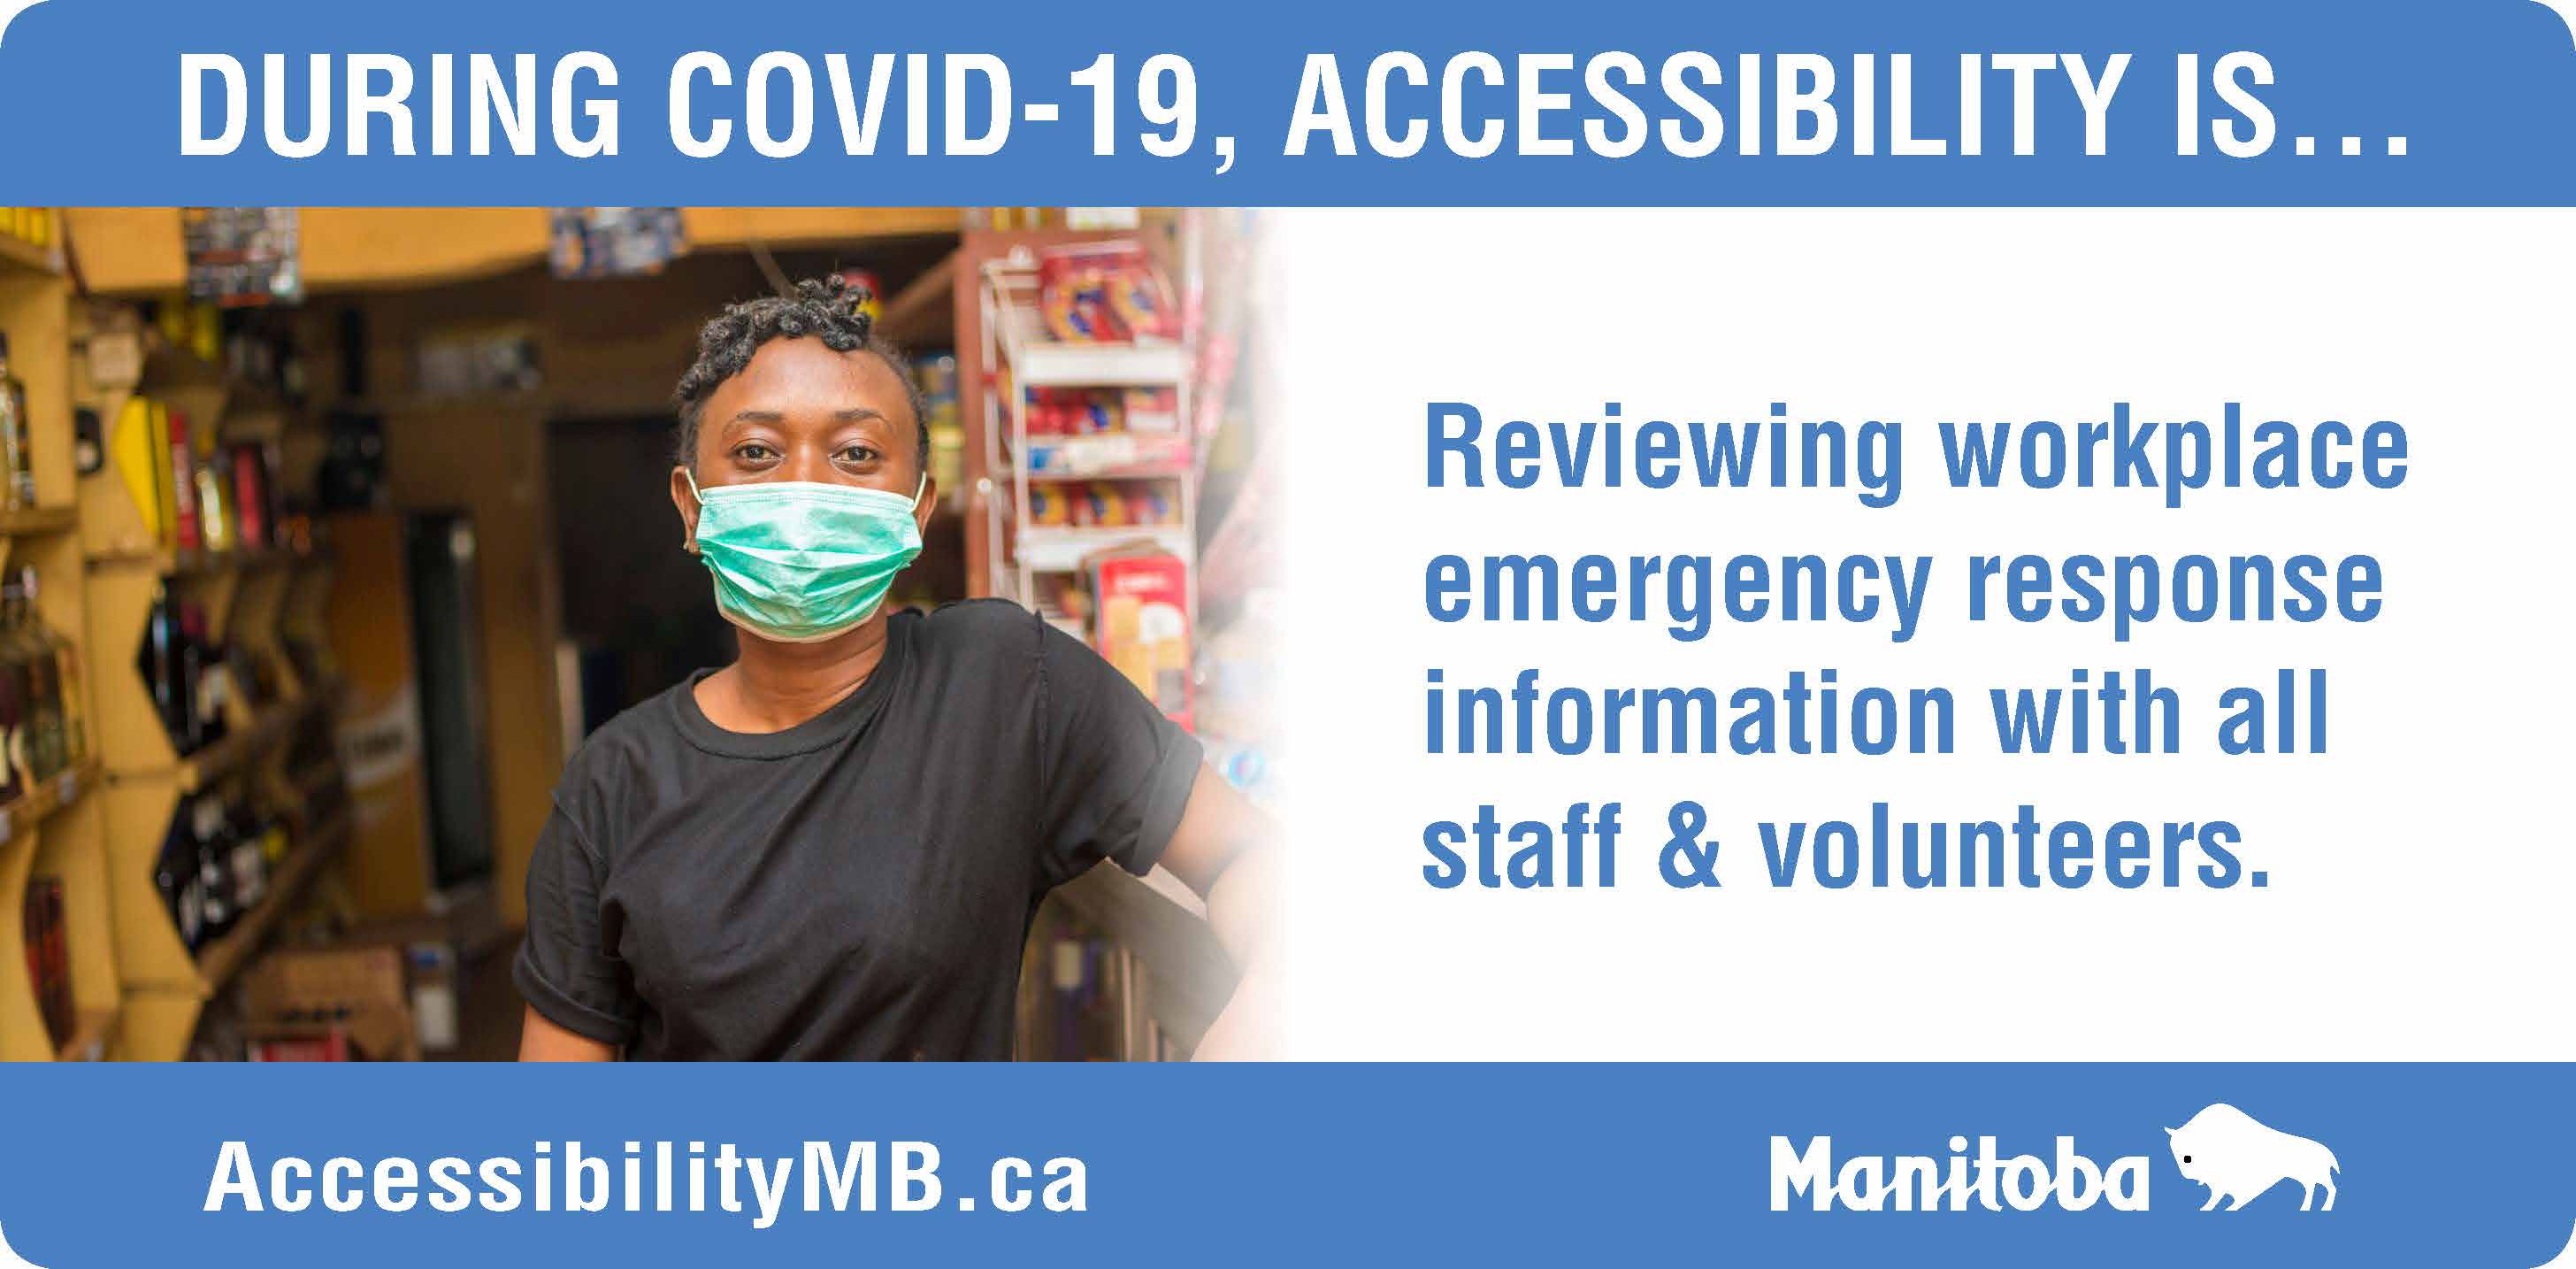 During Covid 19, Accessibility is... Reviewing Workplace emergency response information with all staff and volenteers.